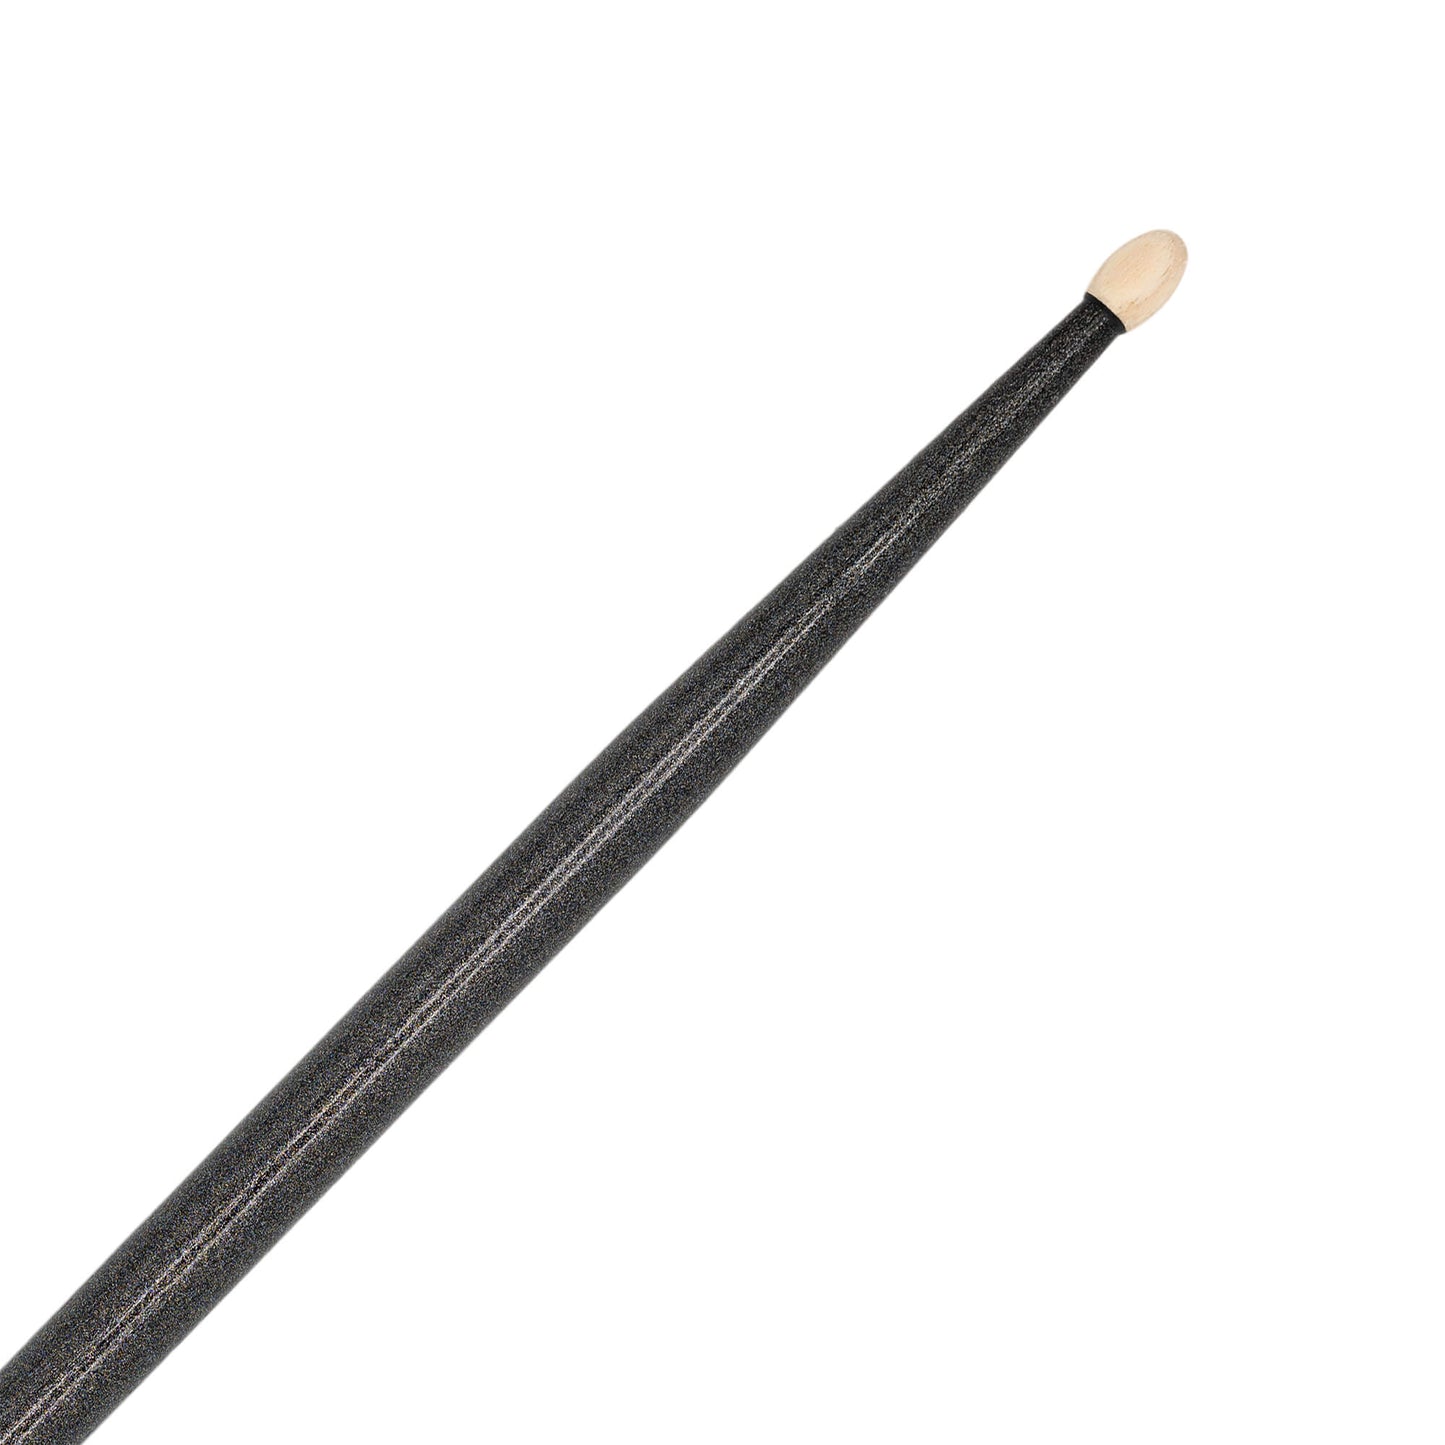 Z Custom LE Drumstick Collection 5B Black Chroma, Wood Tip